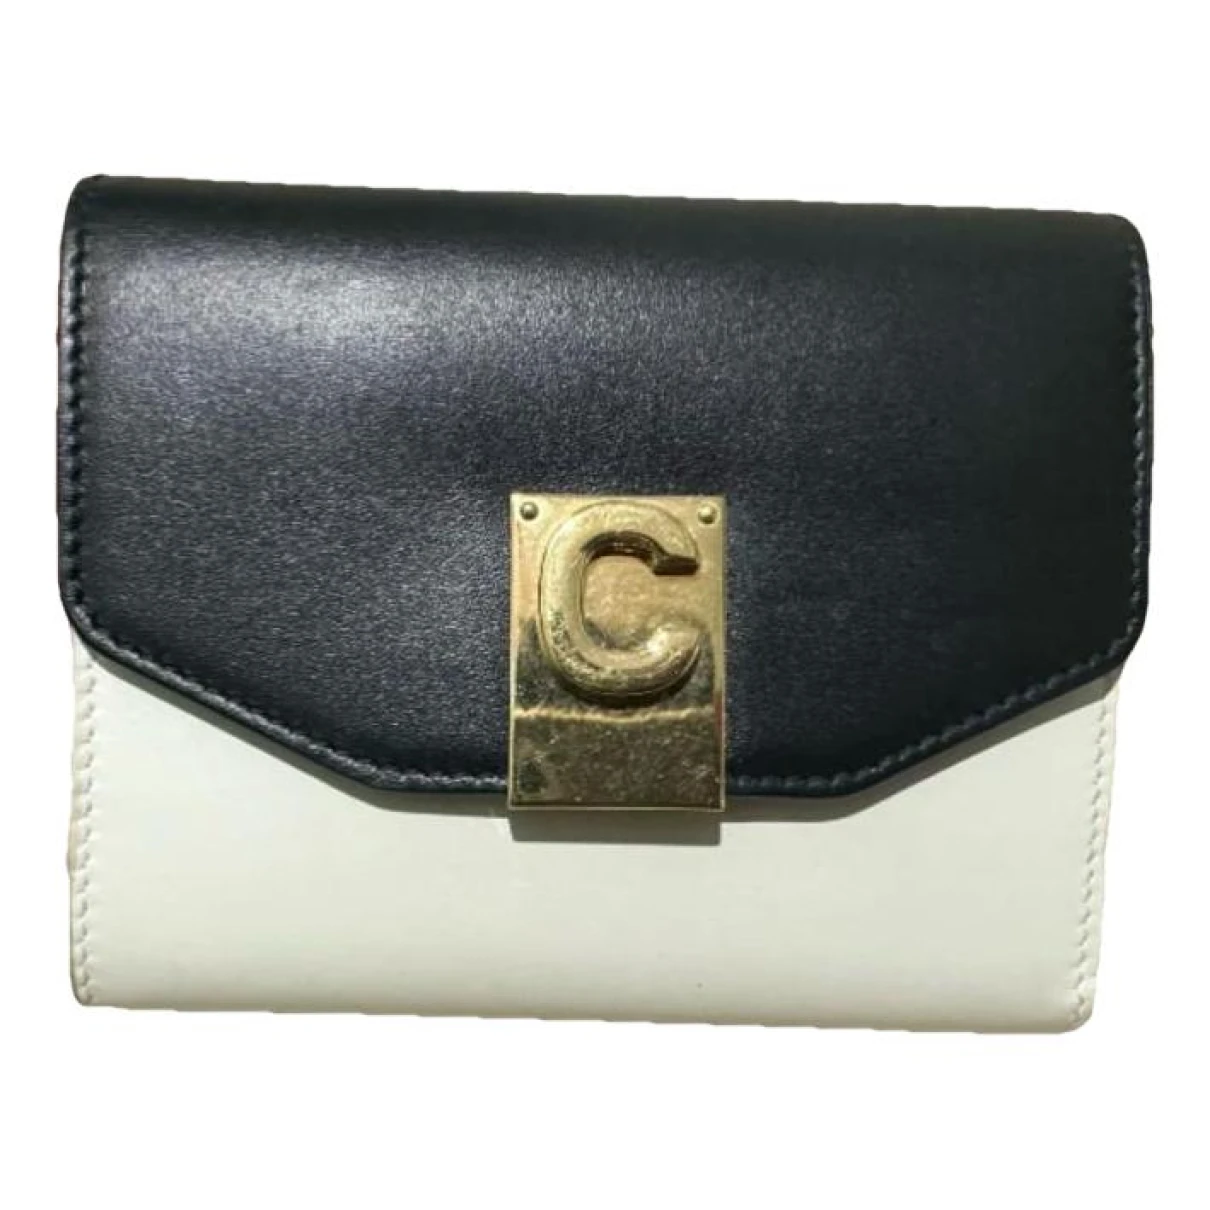 Pre-owned Celine Leather Card Wallet In Other